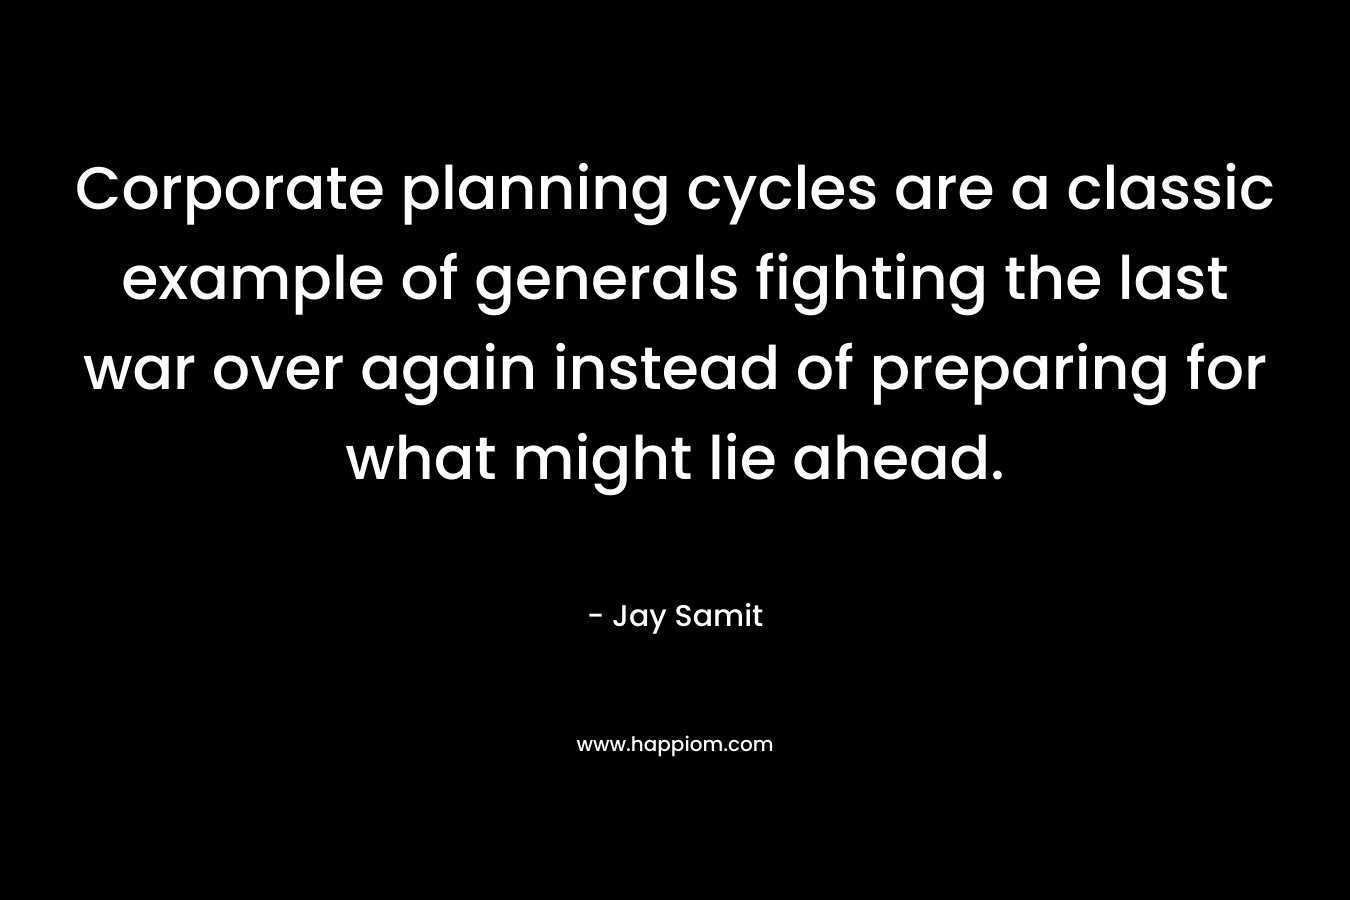 Corporate planning cycles are a classic example of generals fighting the last war over again instead of preparing for what might lie ahead.